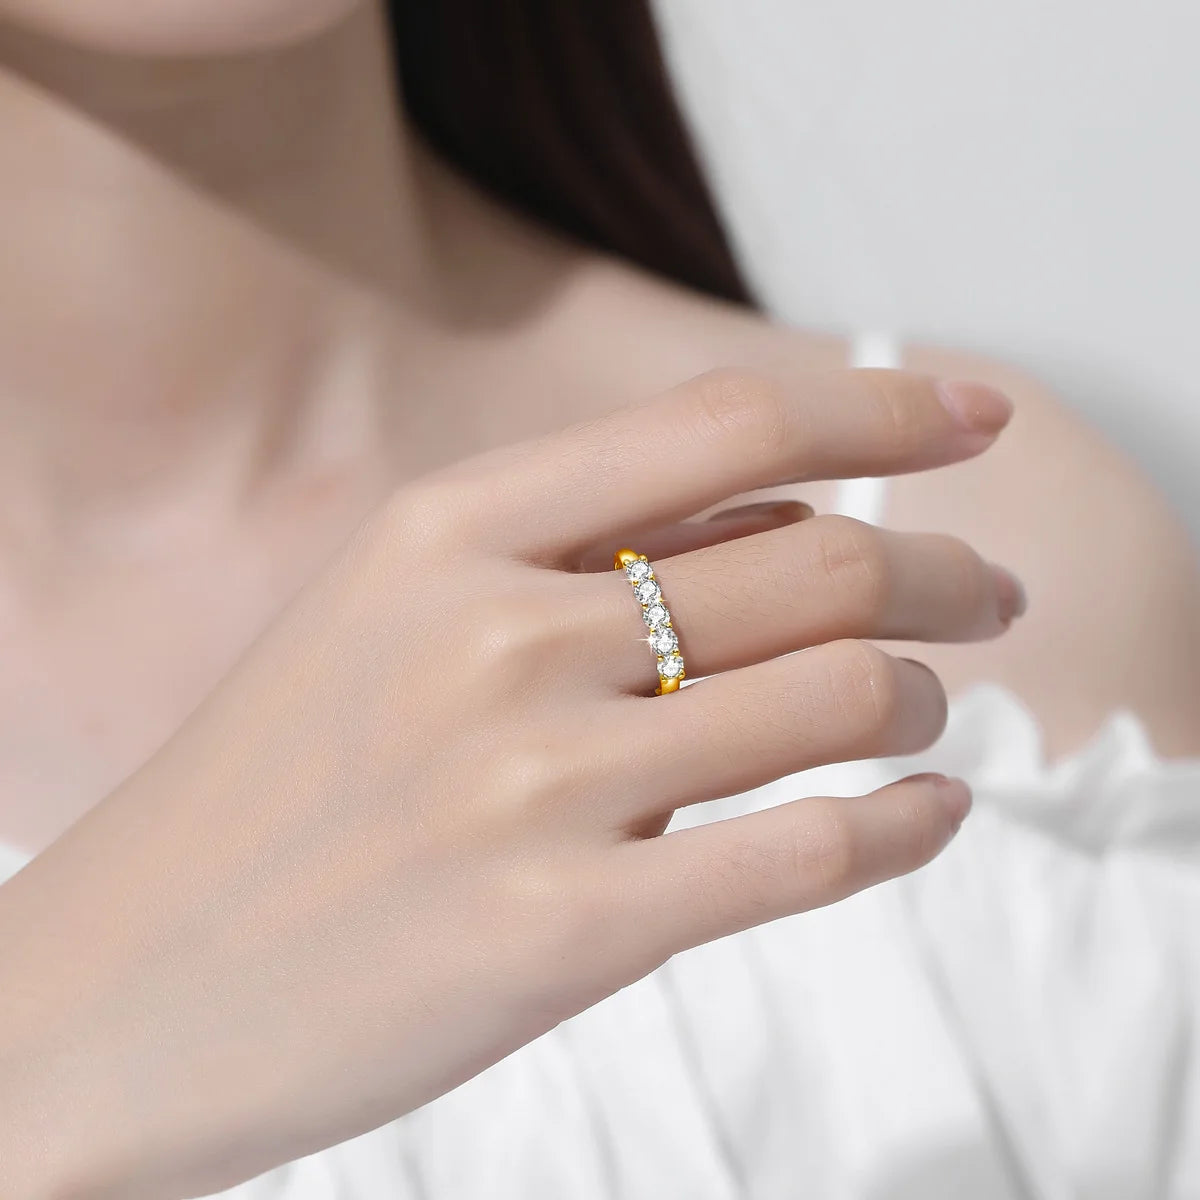 A hand wearing the Maramalive™ With Certificate Original Solid 18K Gold Moissanite Ring For Women 5 Stone Luxury Wedding Jewelry With Stamp Gift Female against a white background.